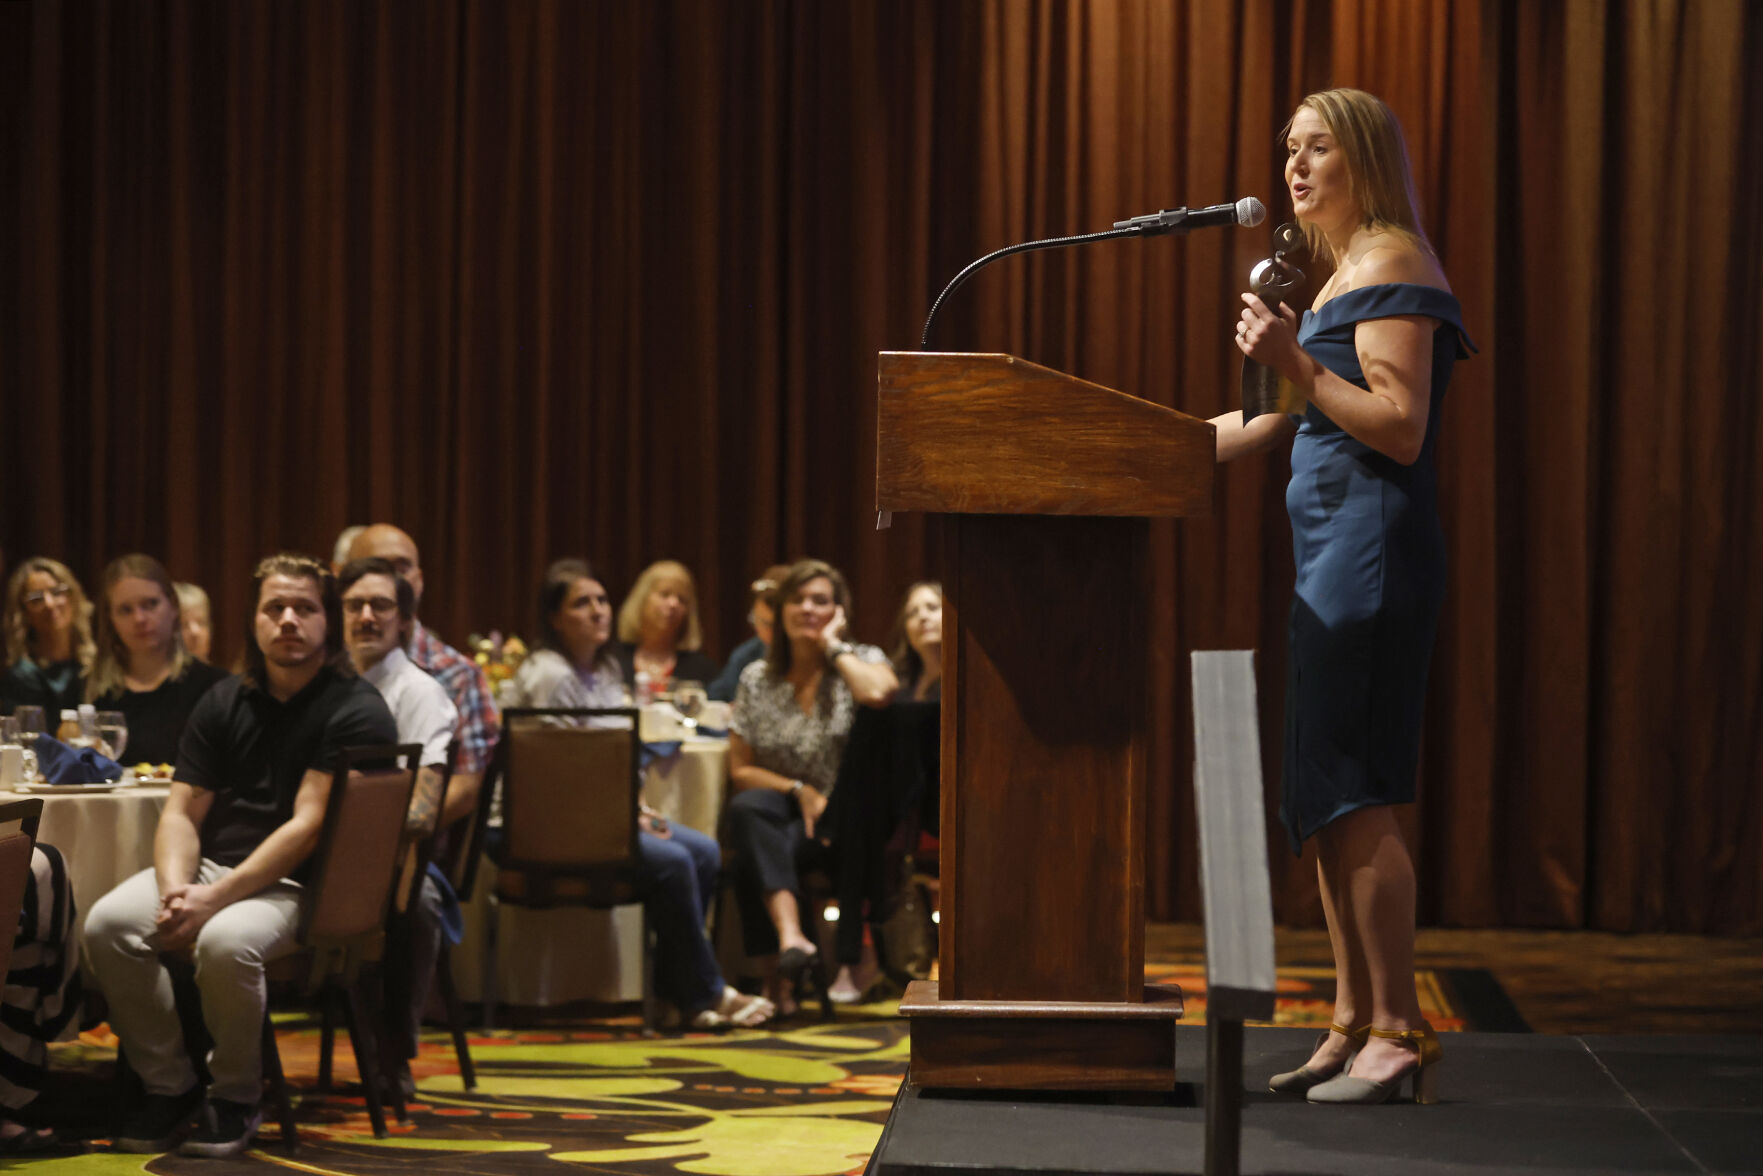 Callie Mescher-FitzGerald speaks during the Salute to Women Awards at Diamond Jo Casino in Dubuque. Callie received the award for Woman to Watch.    PHOTO CREDIT: Jessica Reilly